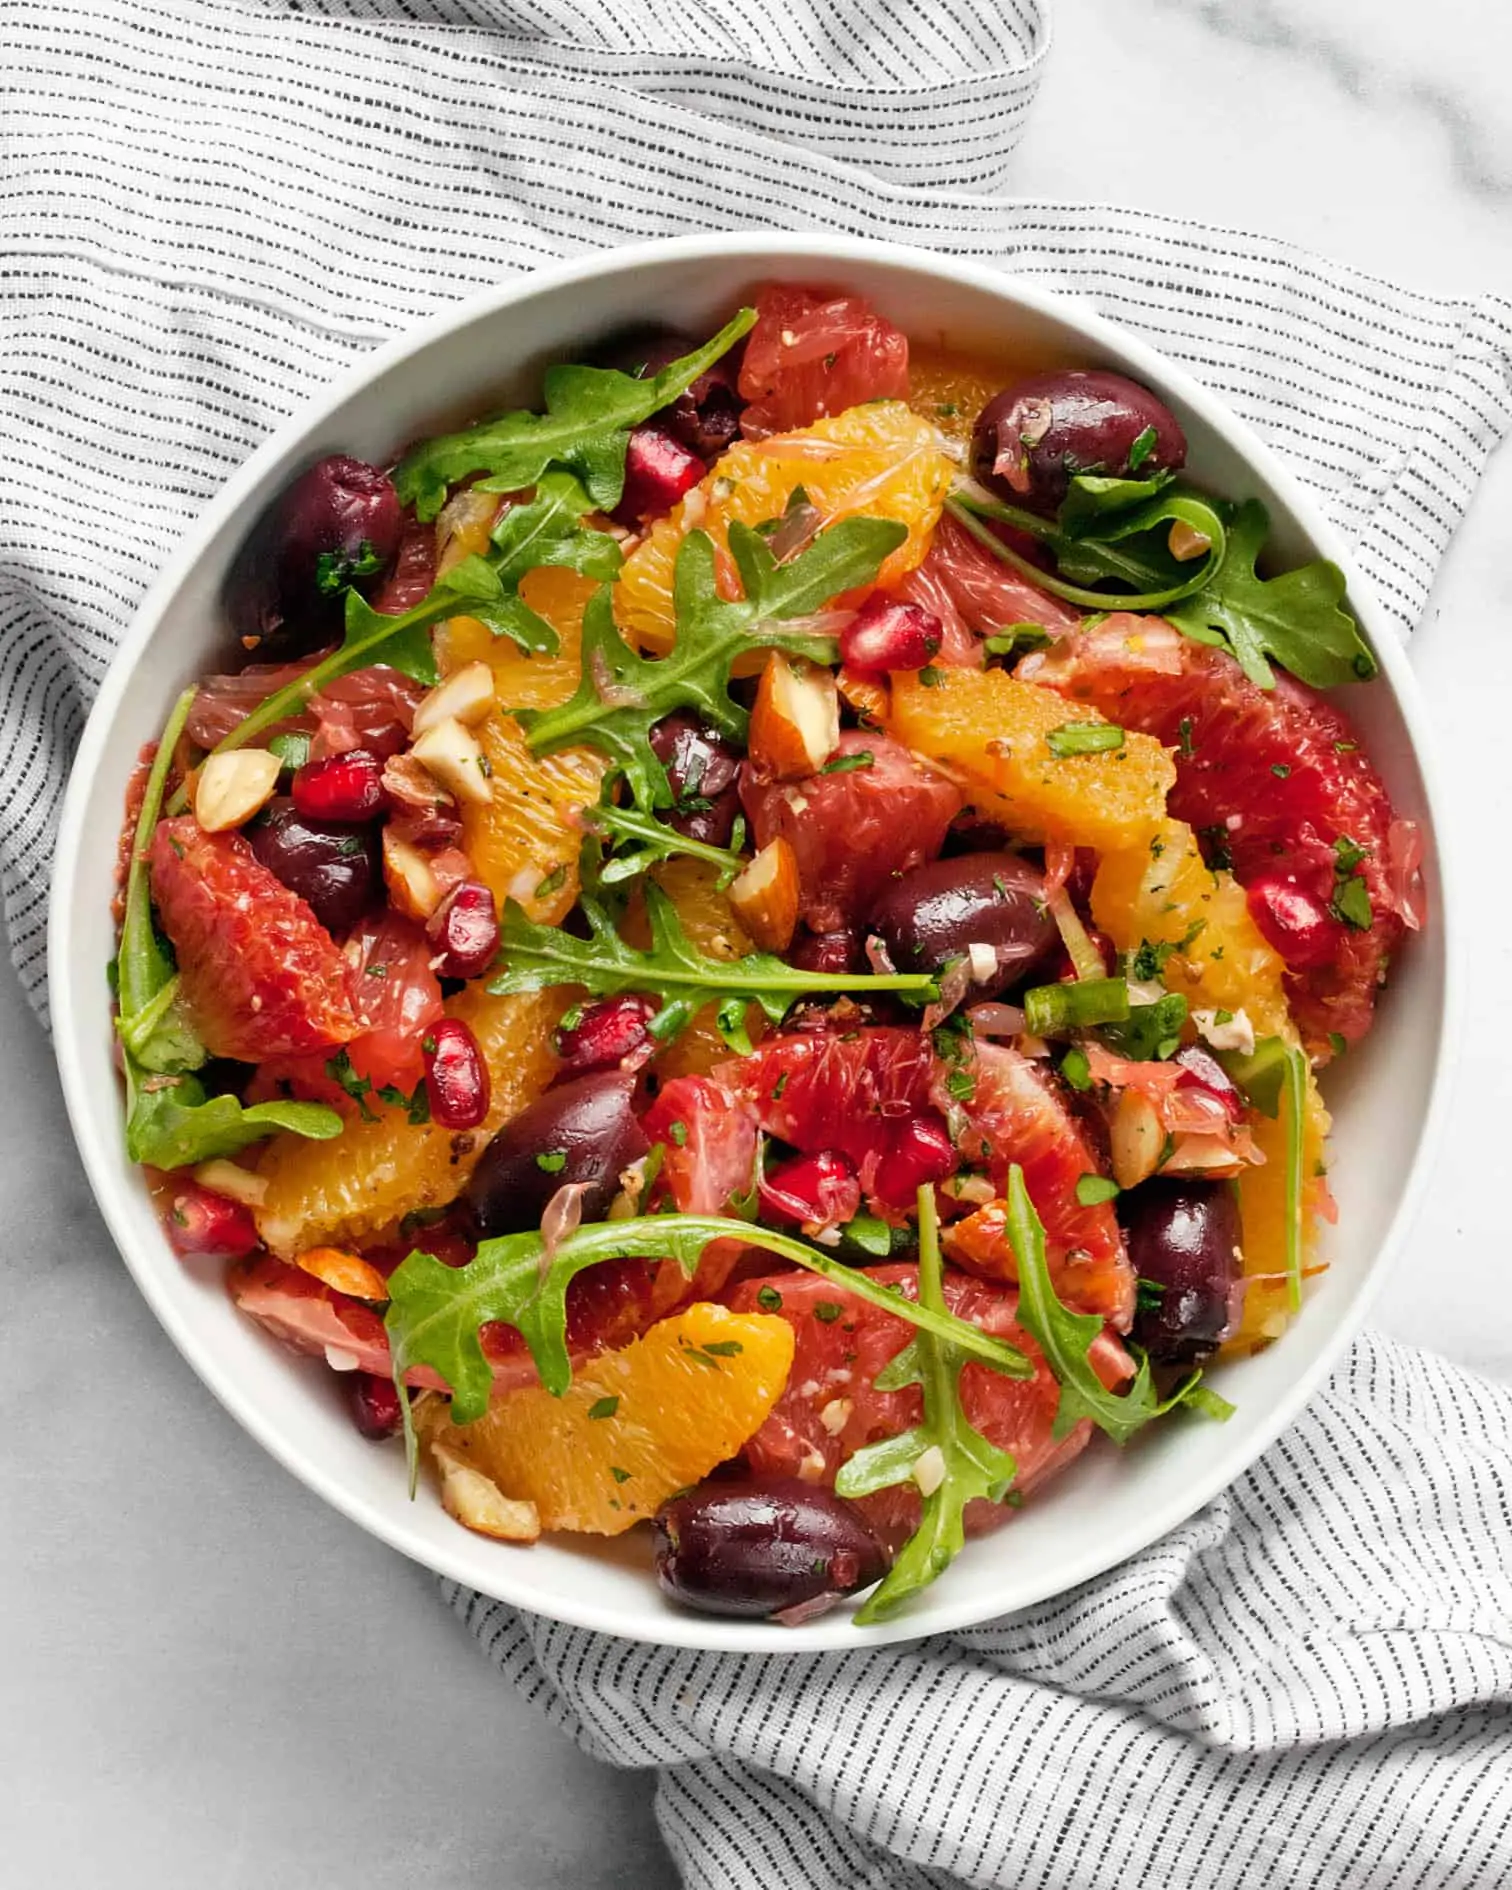 Winter Citrus Salad with Pomegranate Seeds and Olives